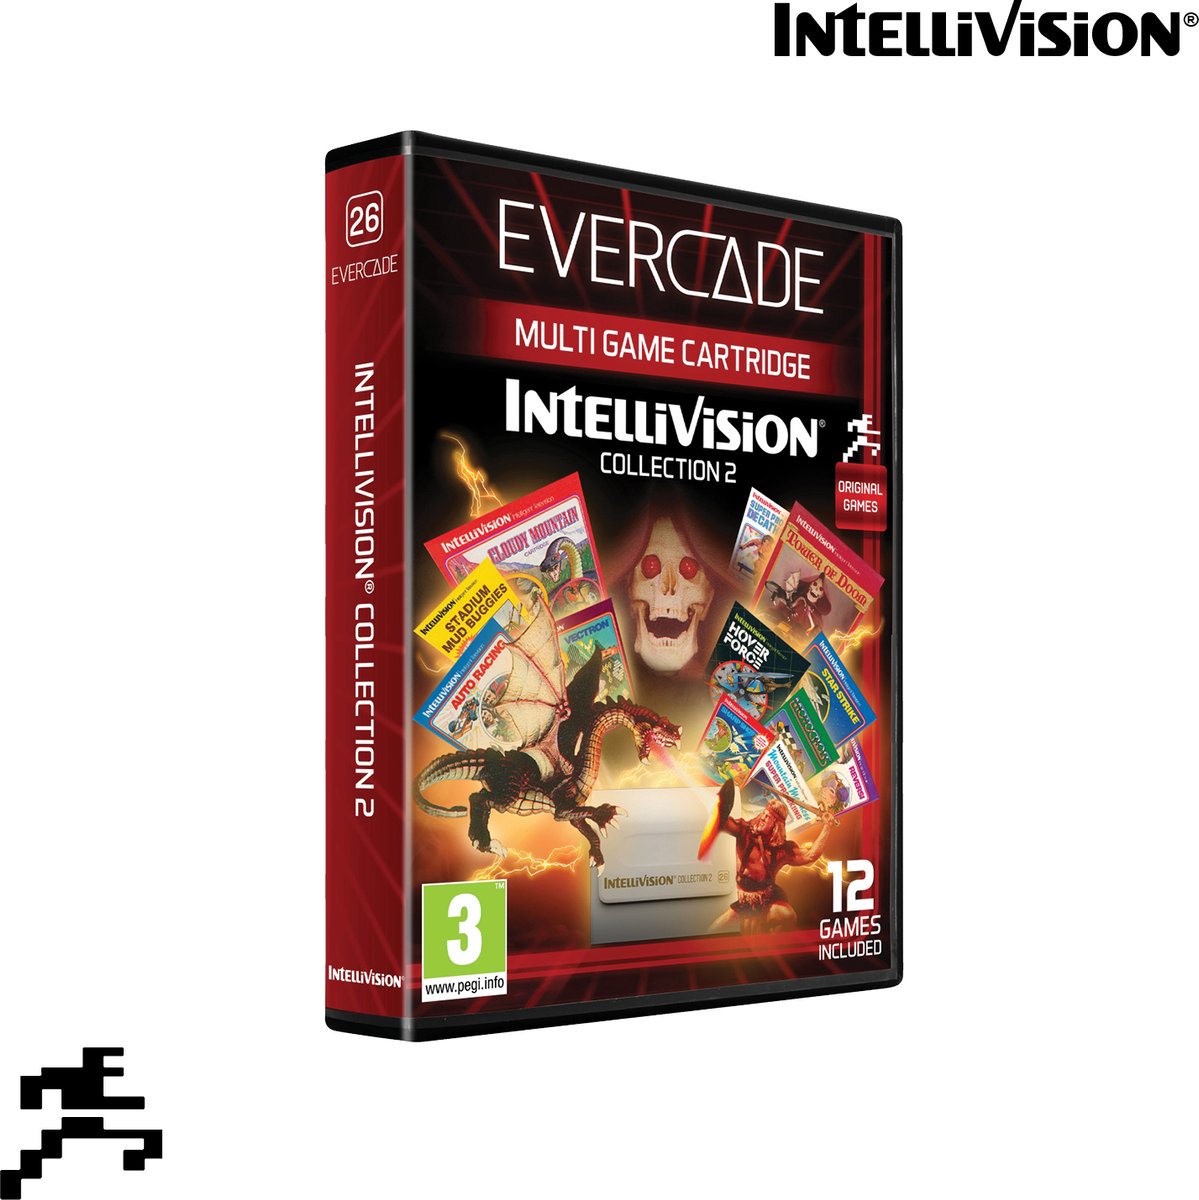 Evercade Intellivision Cartridge collection 2 Gamesellers.nl